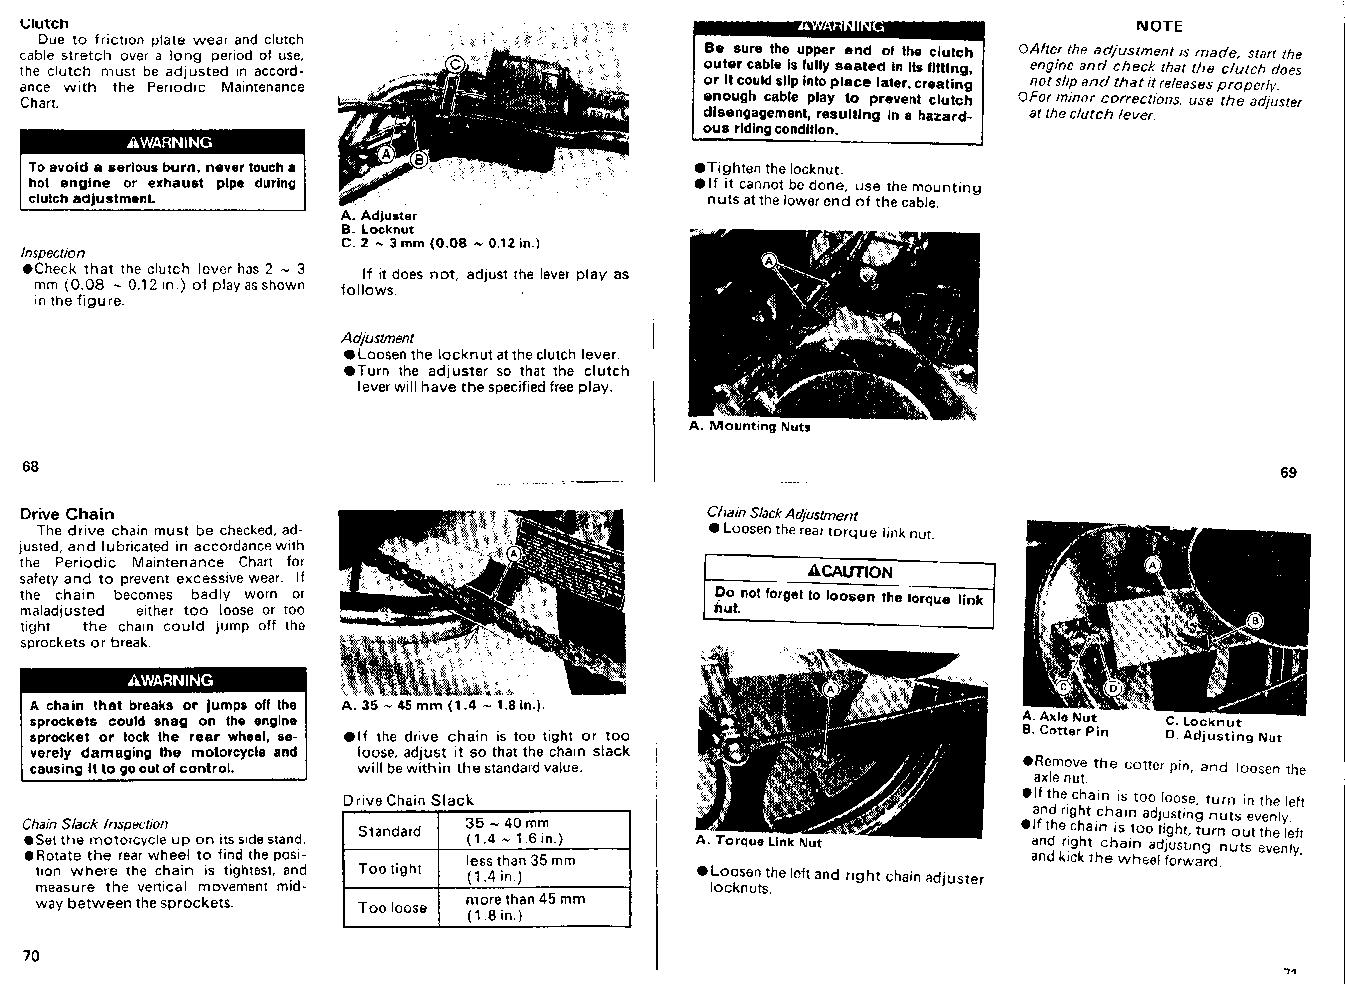 Pages 68-71